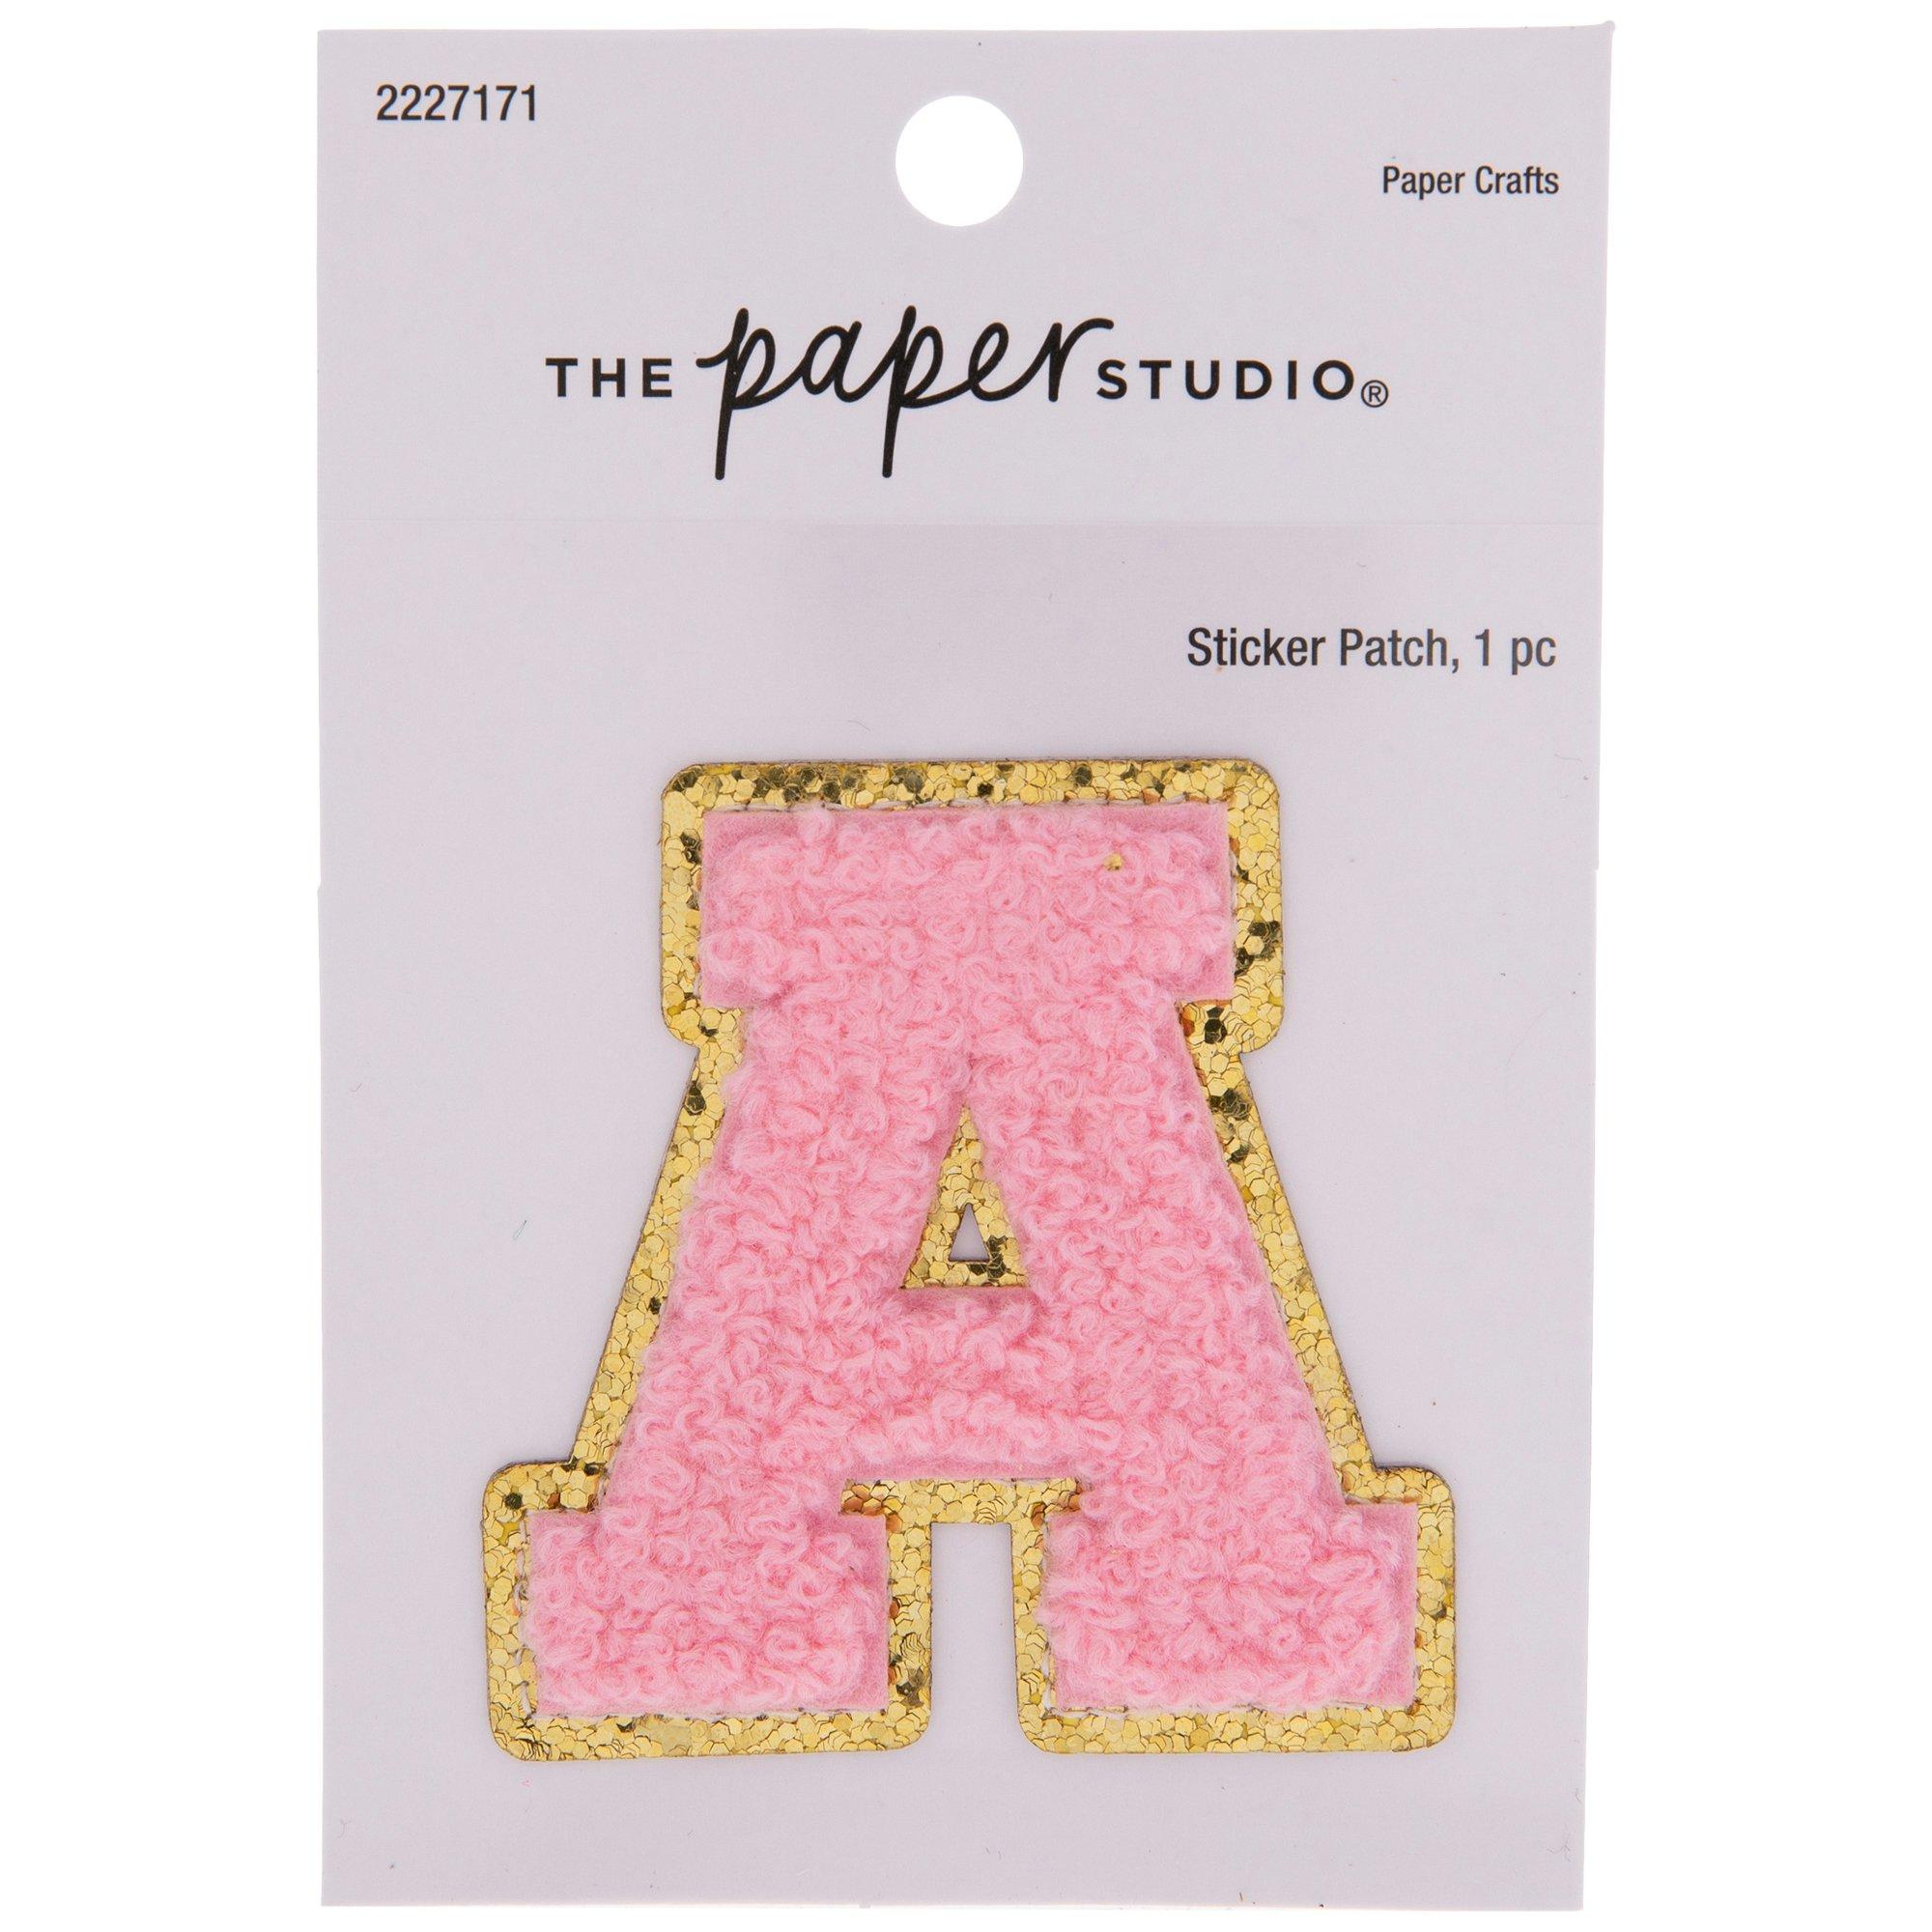 Letter T Pink Glitter Stickers for Sale  Glitter stickers, Pink wallpaper  iphone, Glitter letters